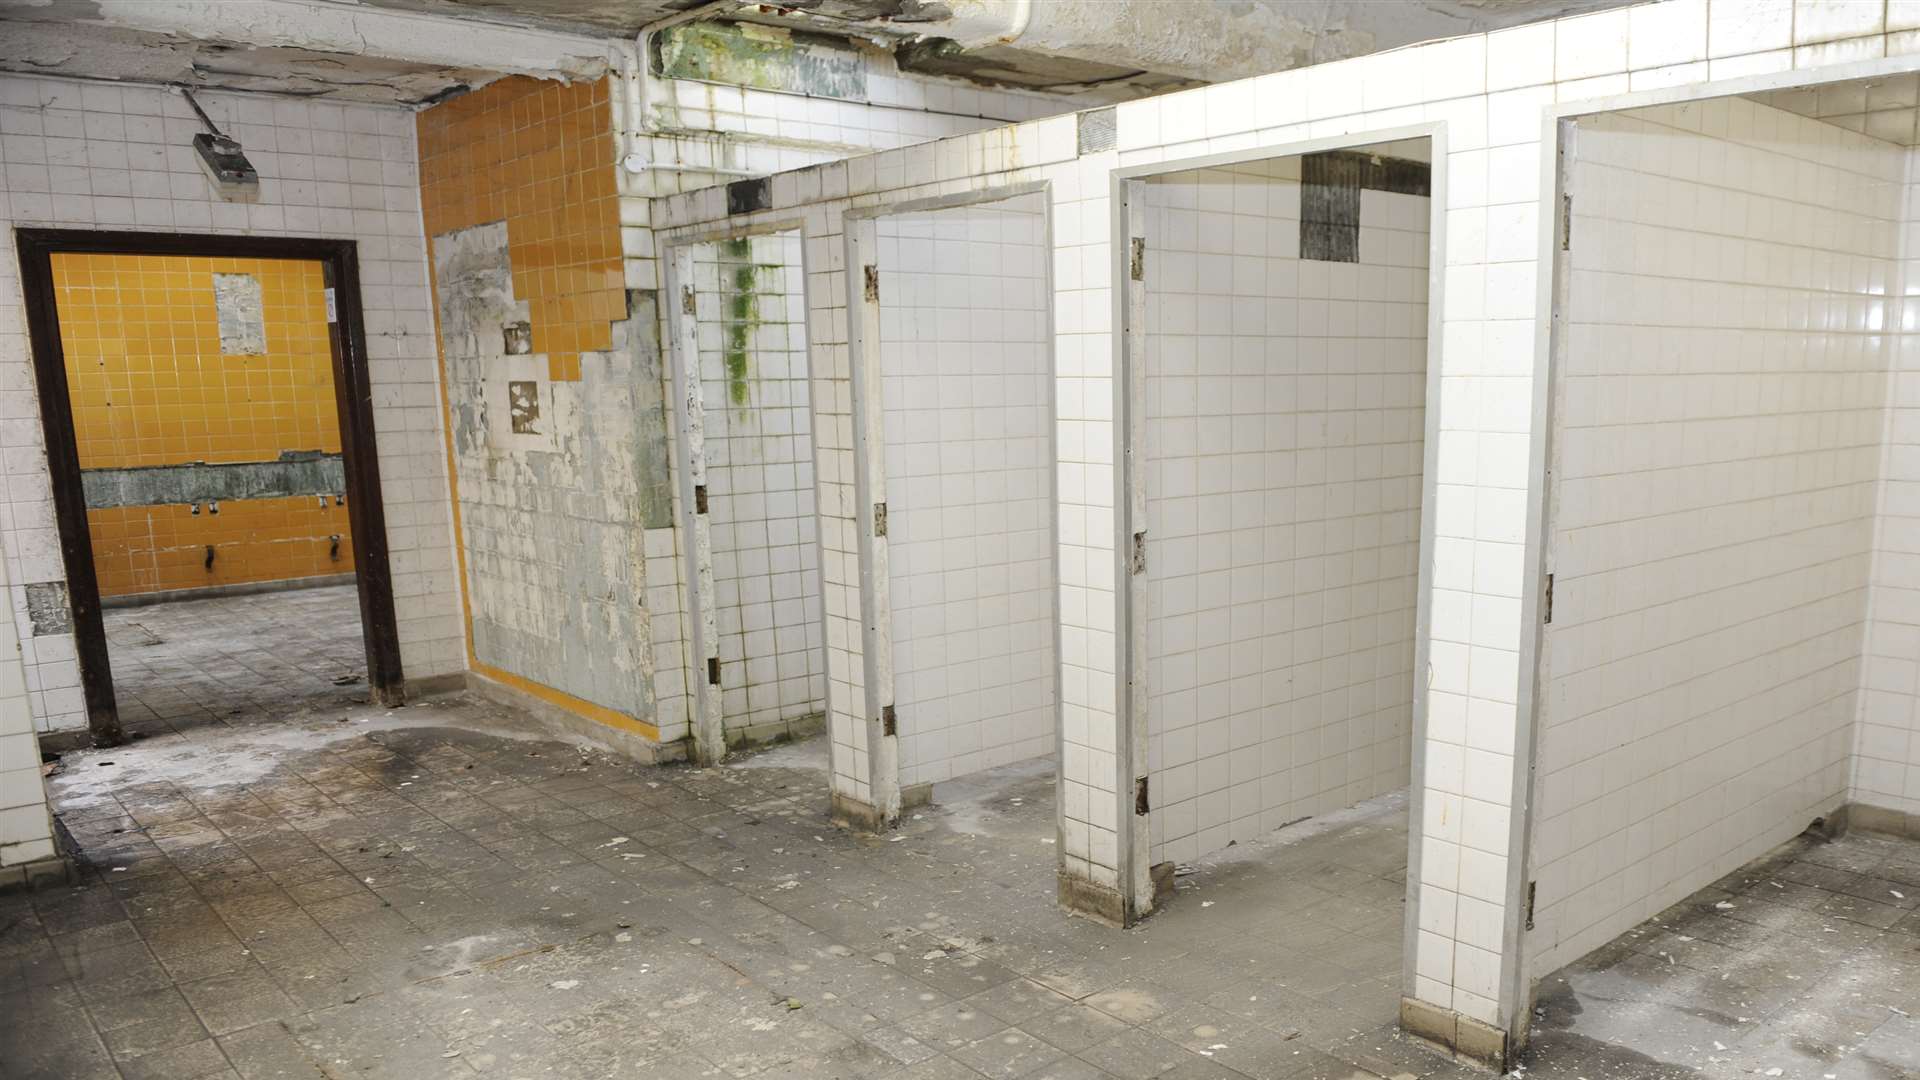 The lavatories will most likely be sold for commercial use